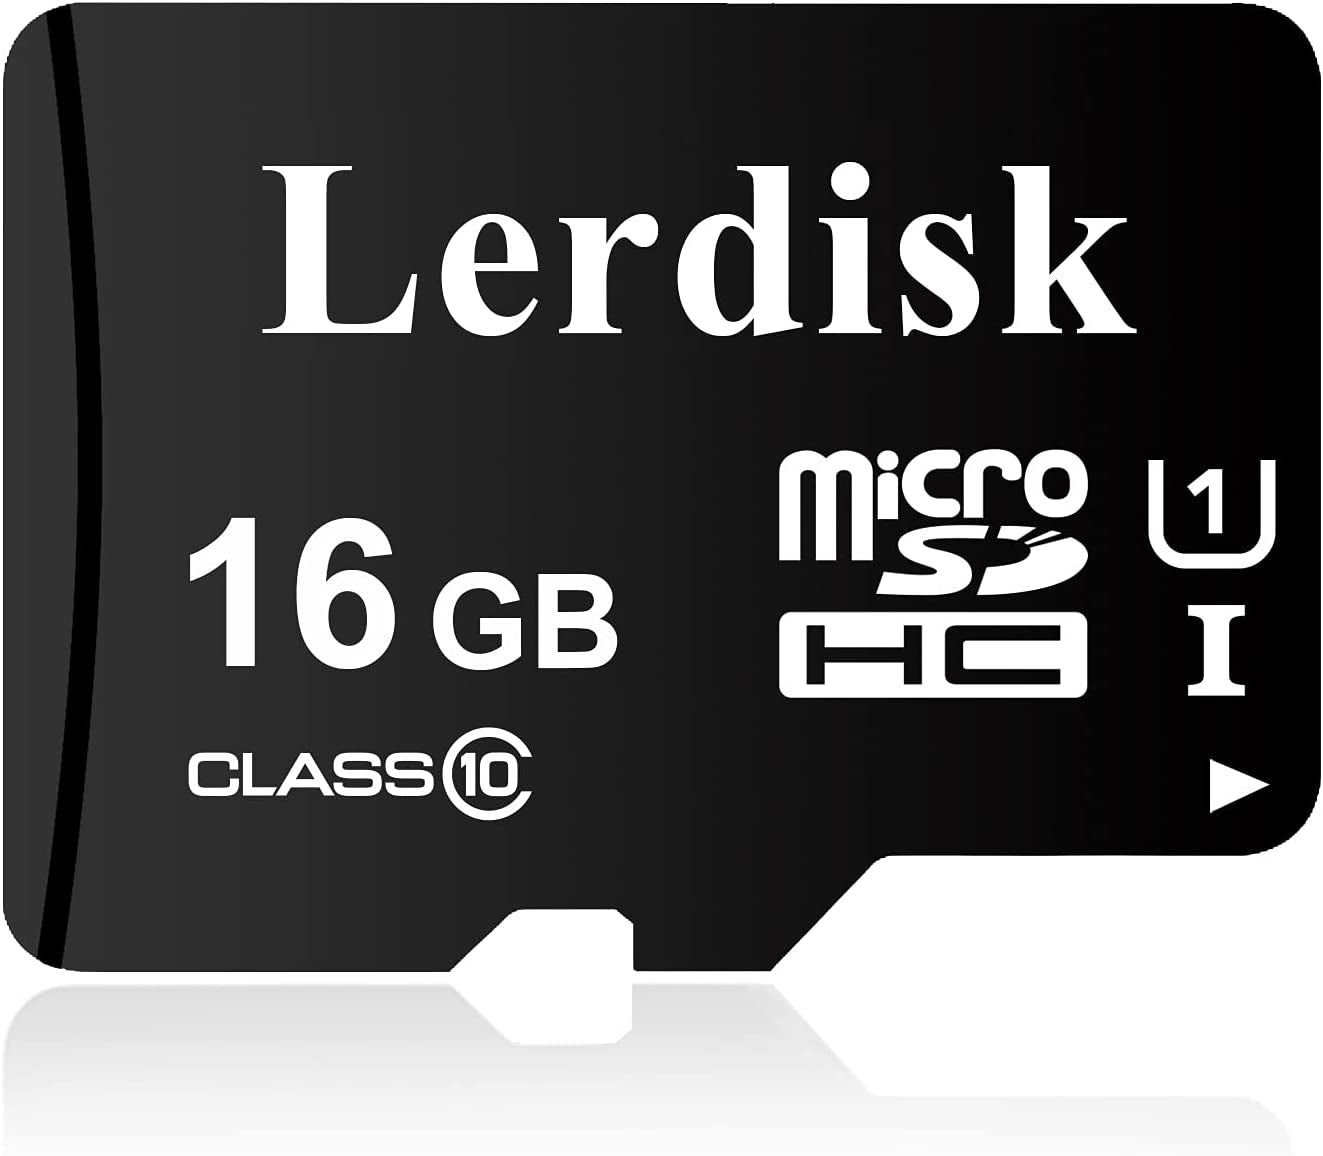 Lerdisk Factory Wholesale Micro SD Card 128MB Class 4 in Bulk Small Capacity 3-Year Warranty Produced by 3C Group Authorized Licencee Special for Small Files Storage or Company Use (NOT GB)